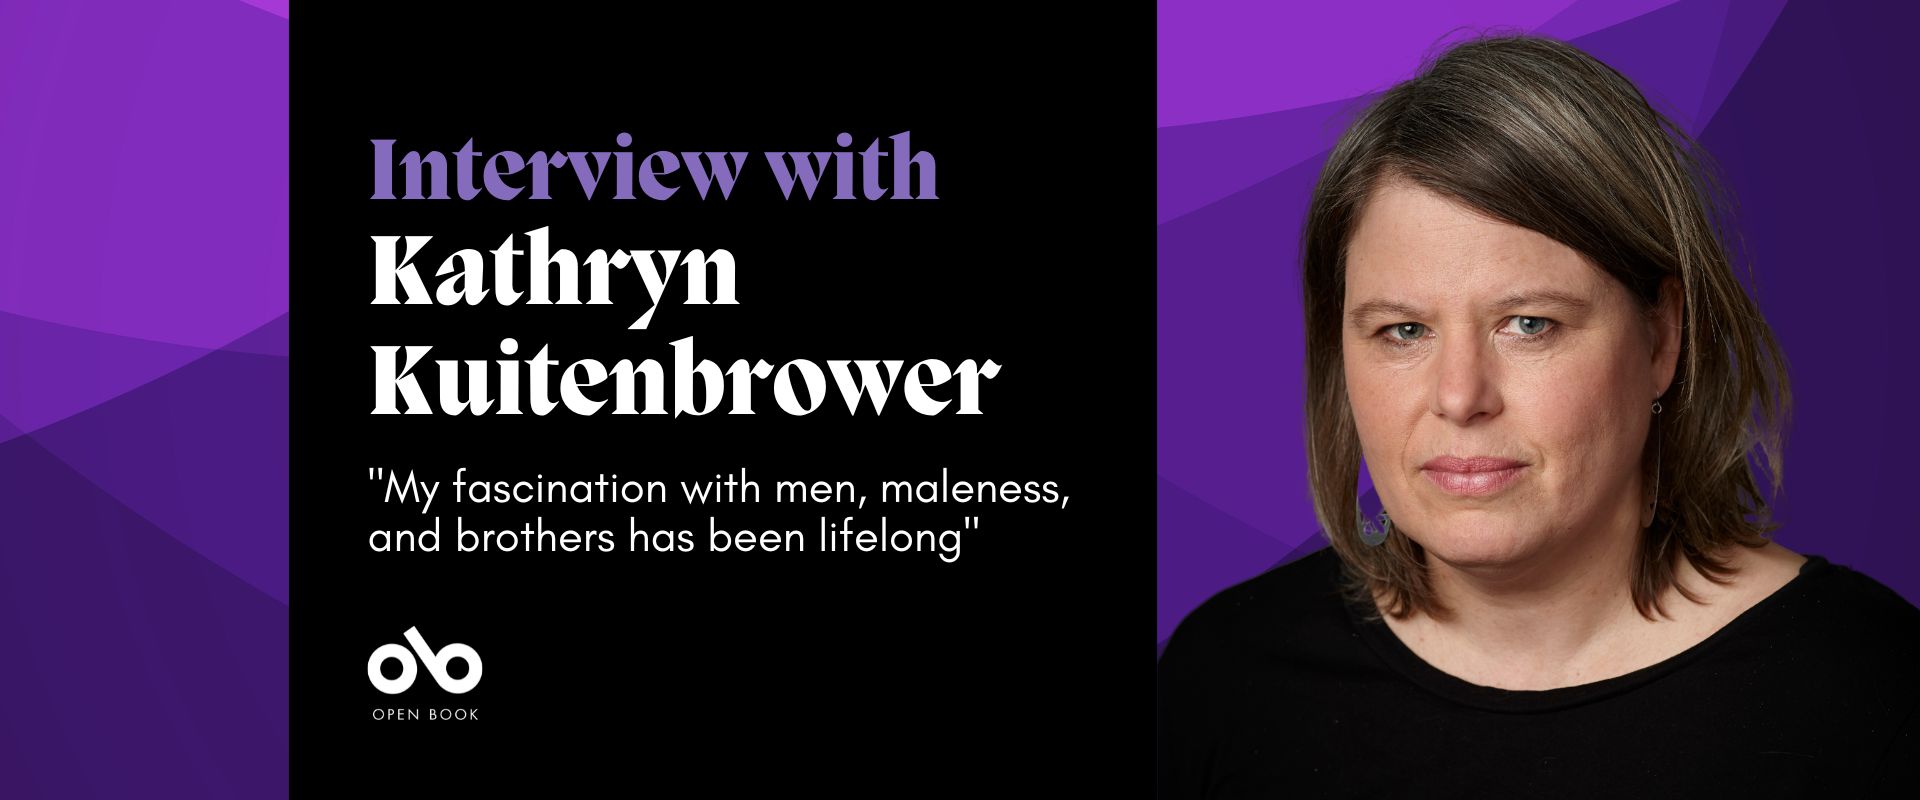 Black and purple banner with photo of writer Kathryn Kuitenbrower and text reading “interview with Kathryn Kuitenbrower” and “My fascination with men, maleness, and brothers has been lifelong”